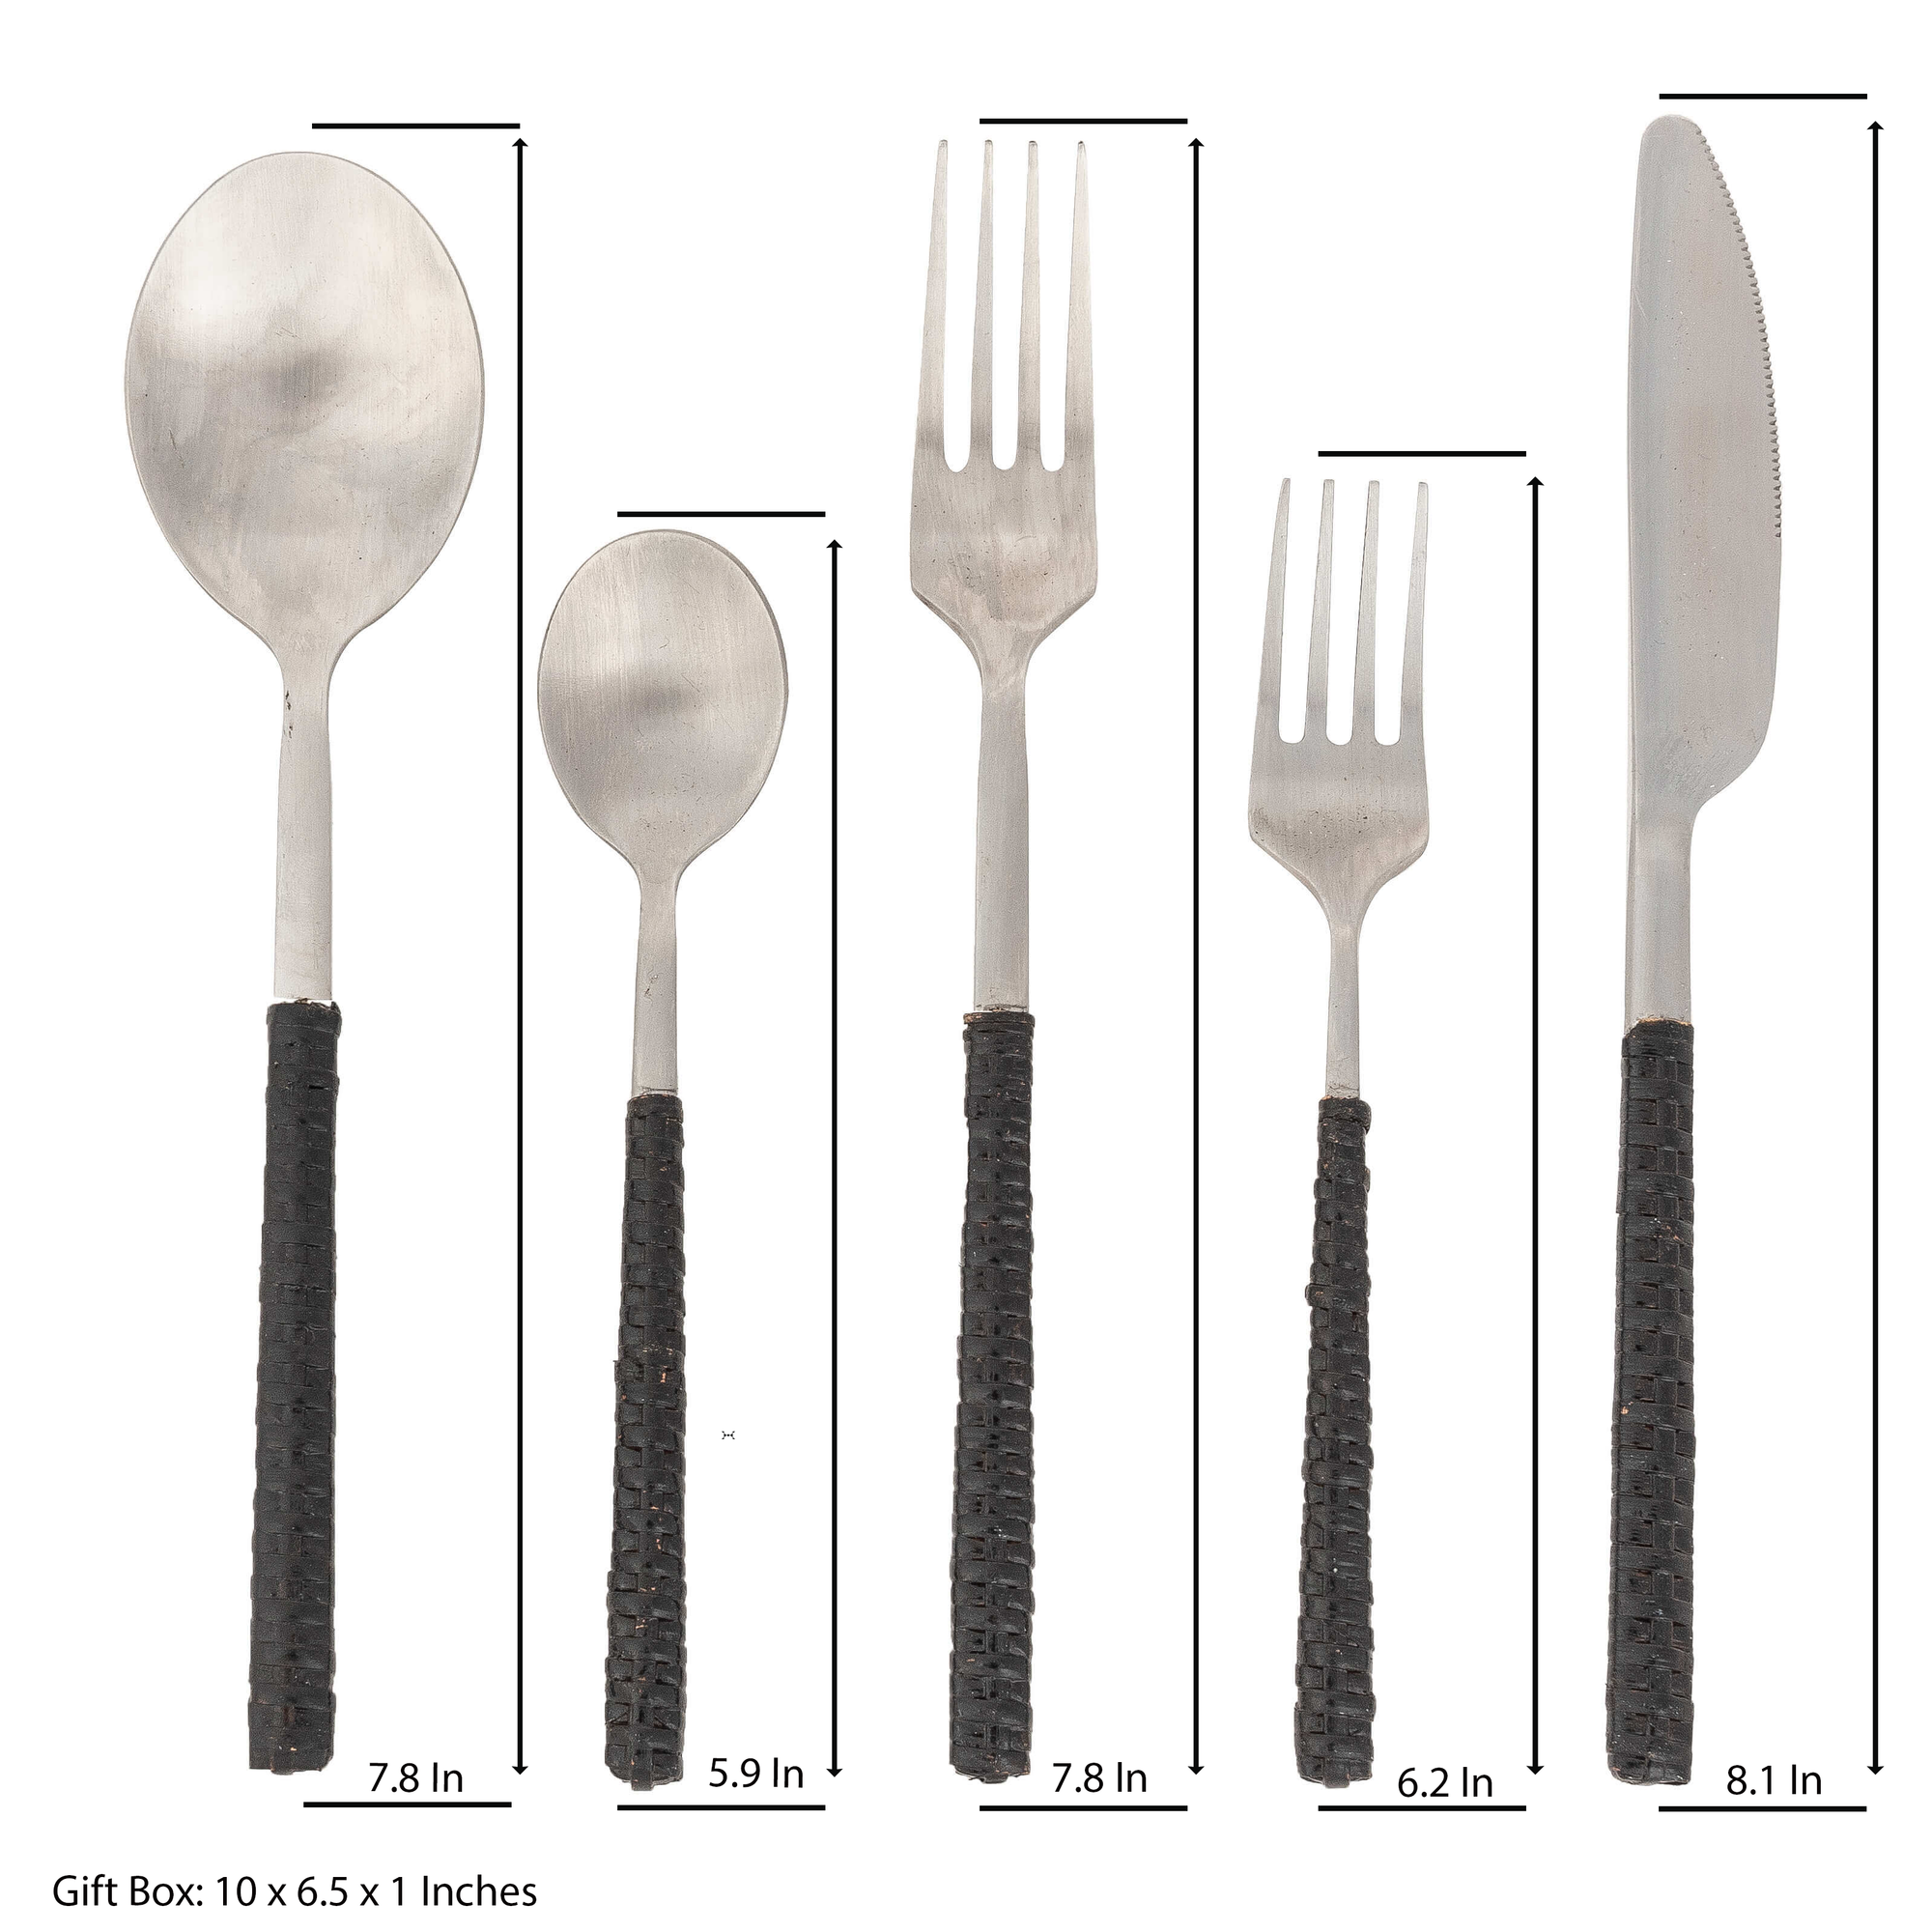 Rattan Stainless Steel Cutlery (Set of 5) - With Gift Box